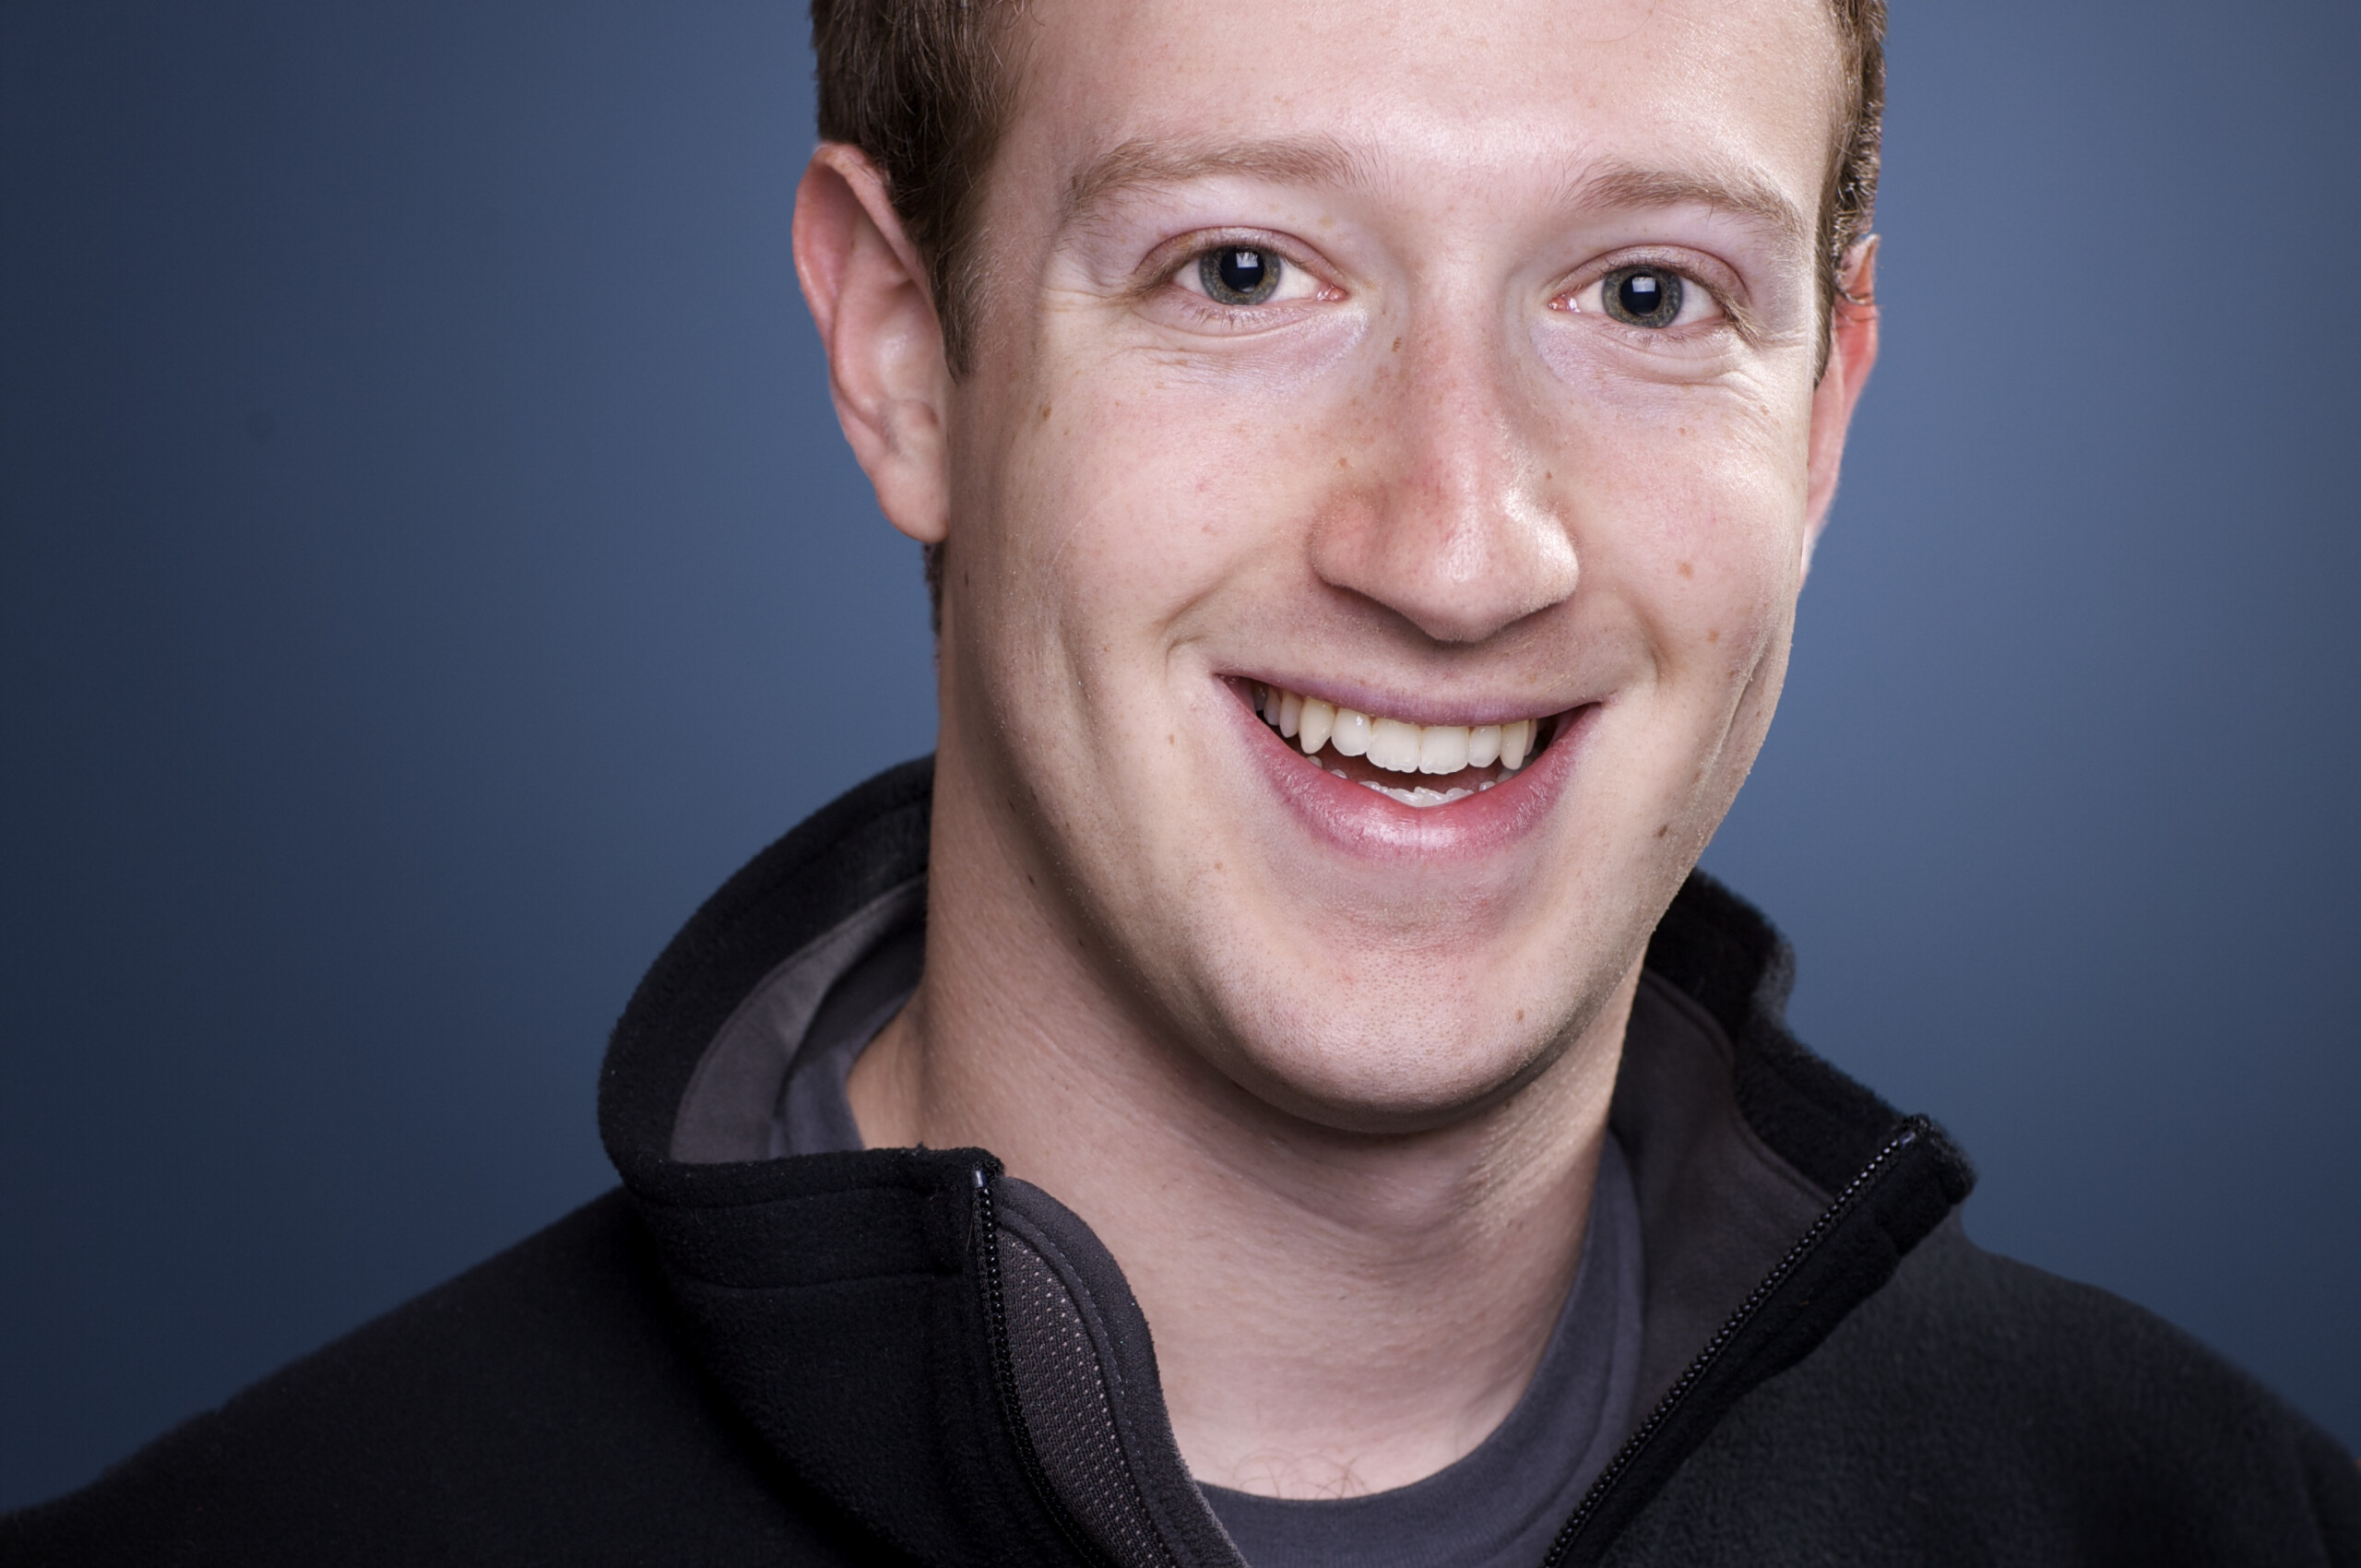 Mark Zuckerberg: The 26th richest person in the world, Net worth was $42.4 billion according to the Forbes Real Time Billionaires. 2560x1700 HD Background.